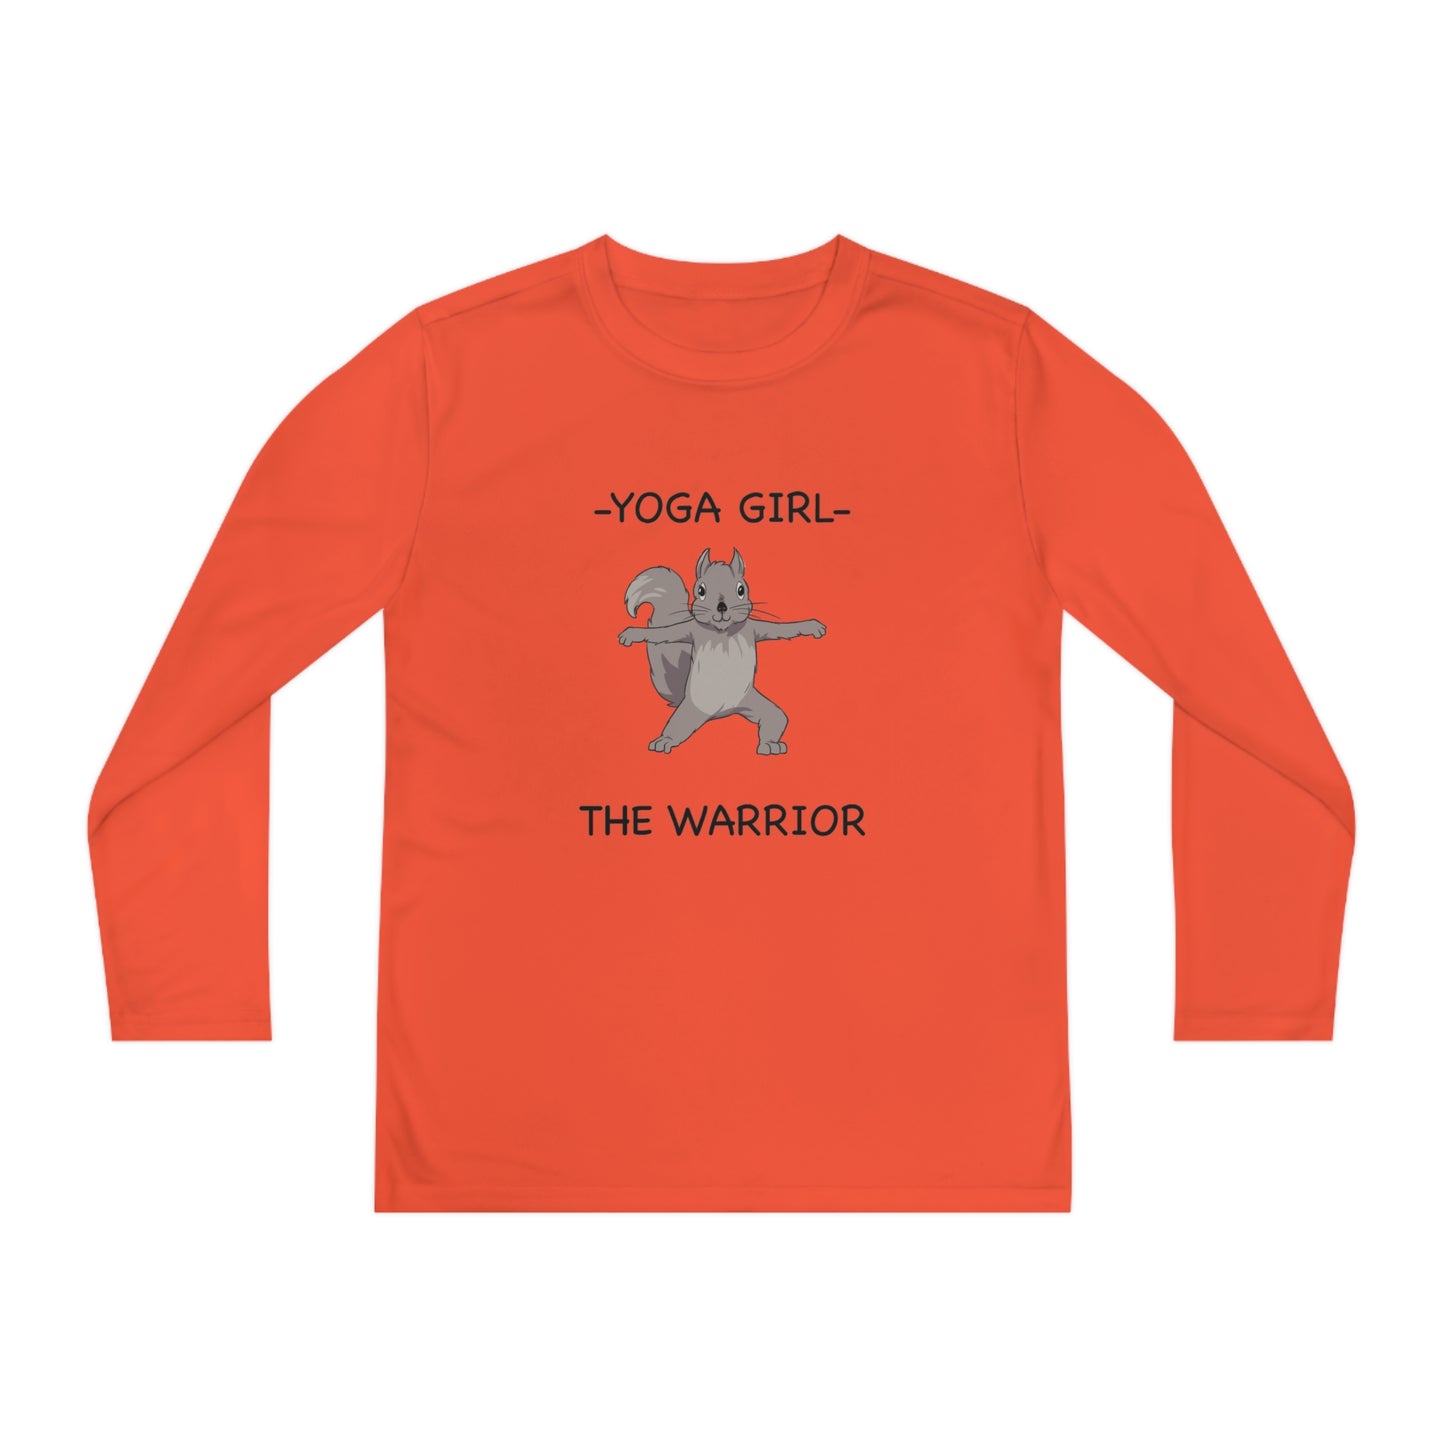 Youth Long Sleeve Competitor Tee